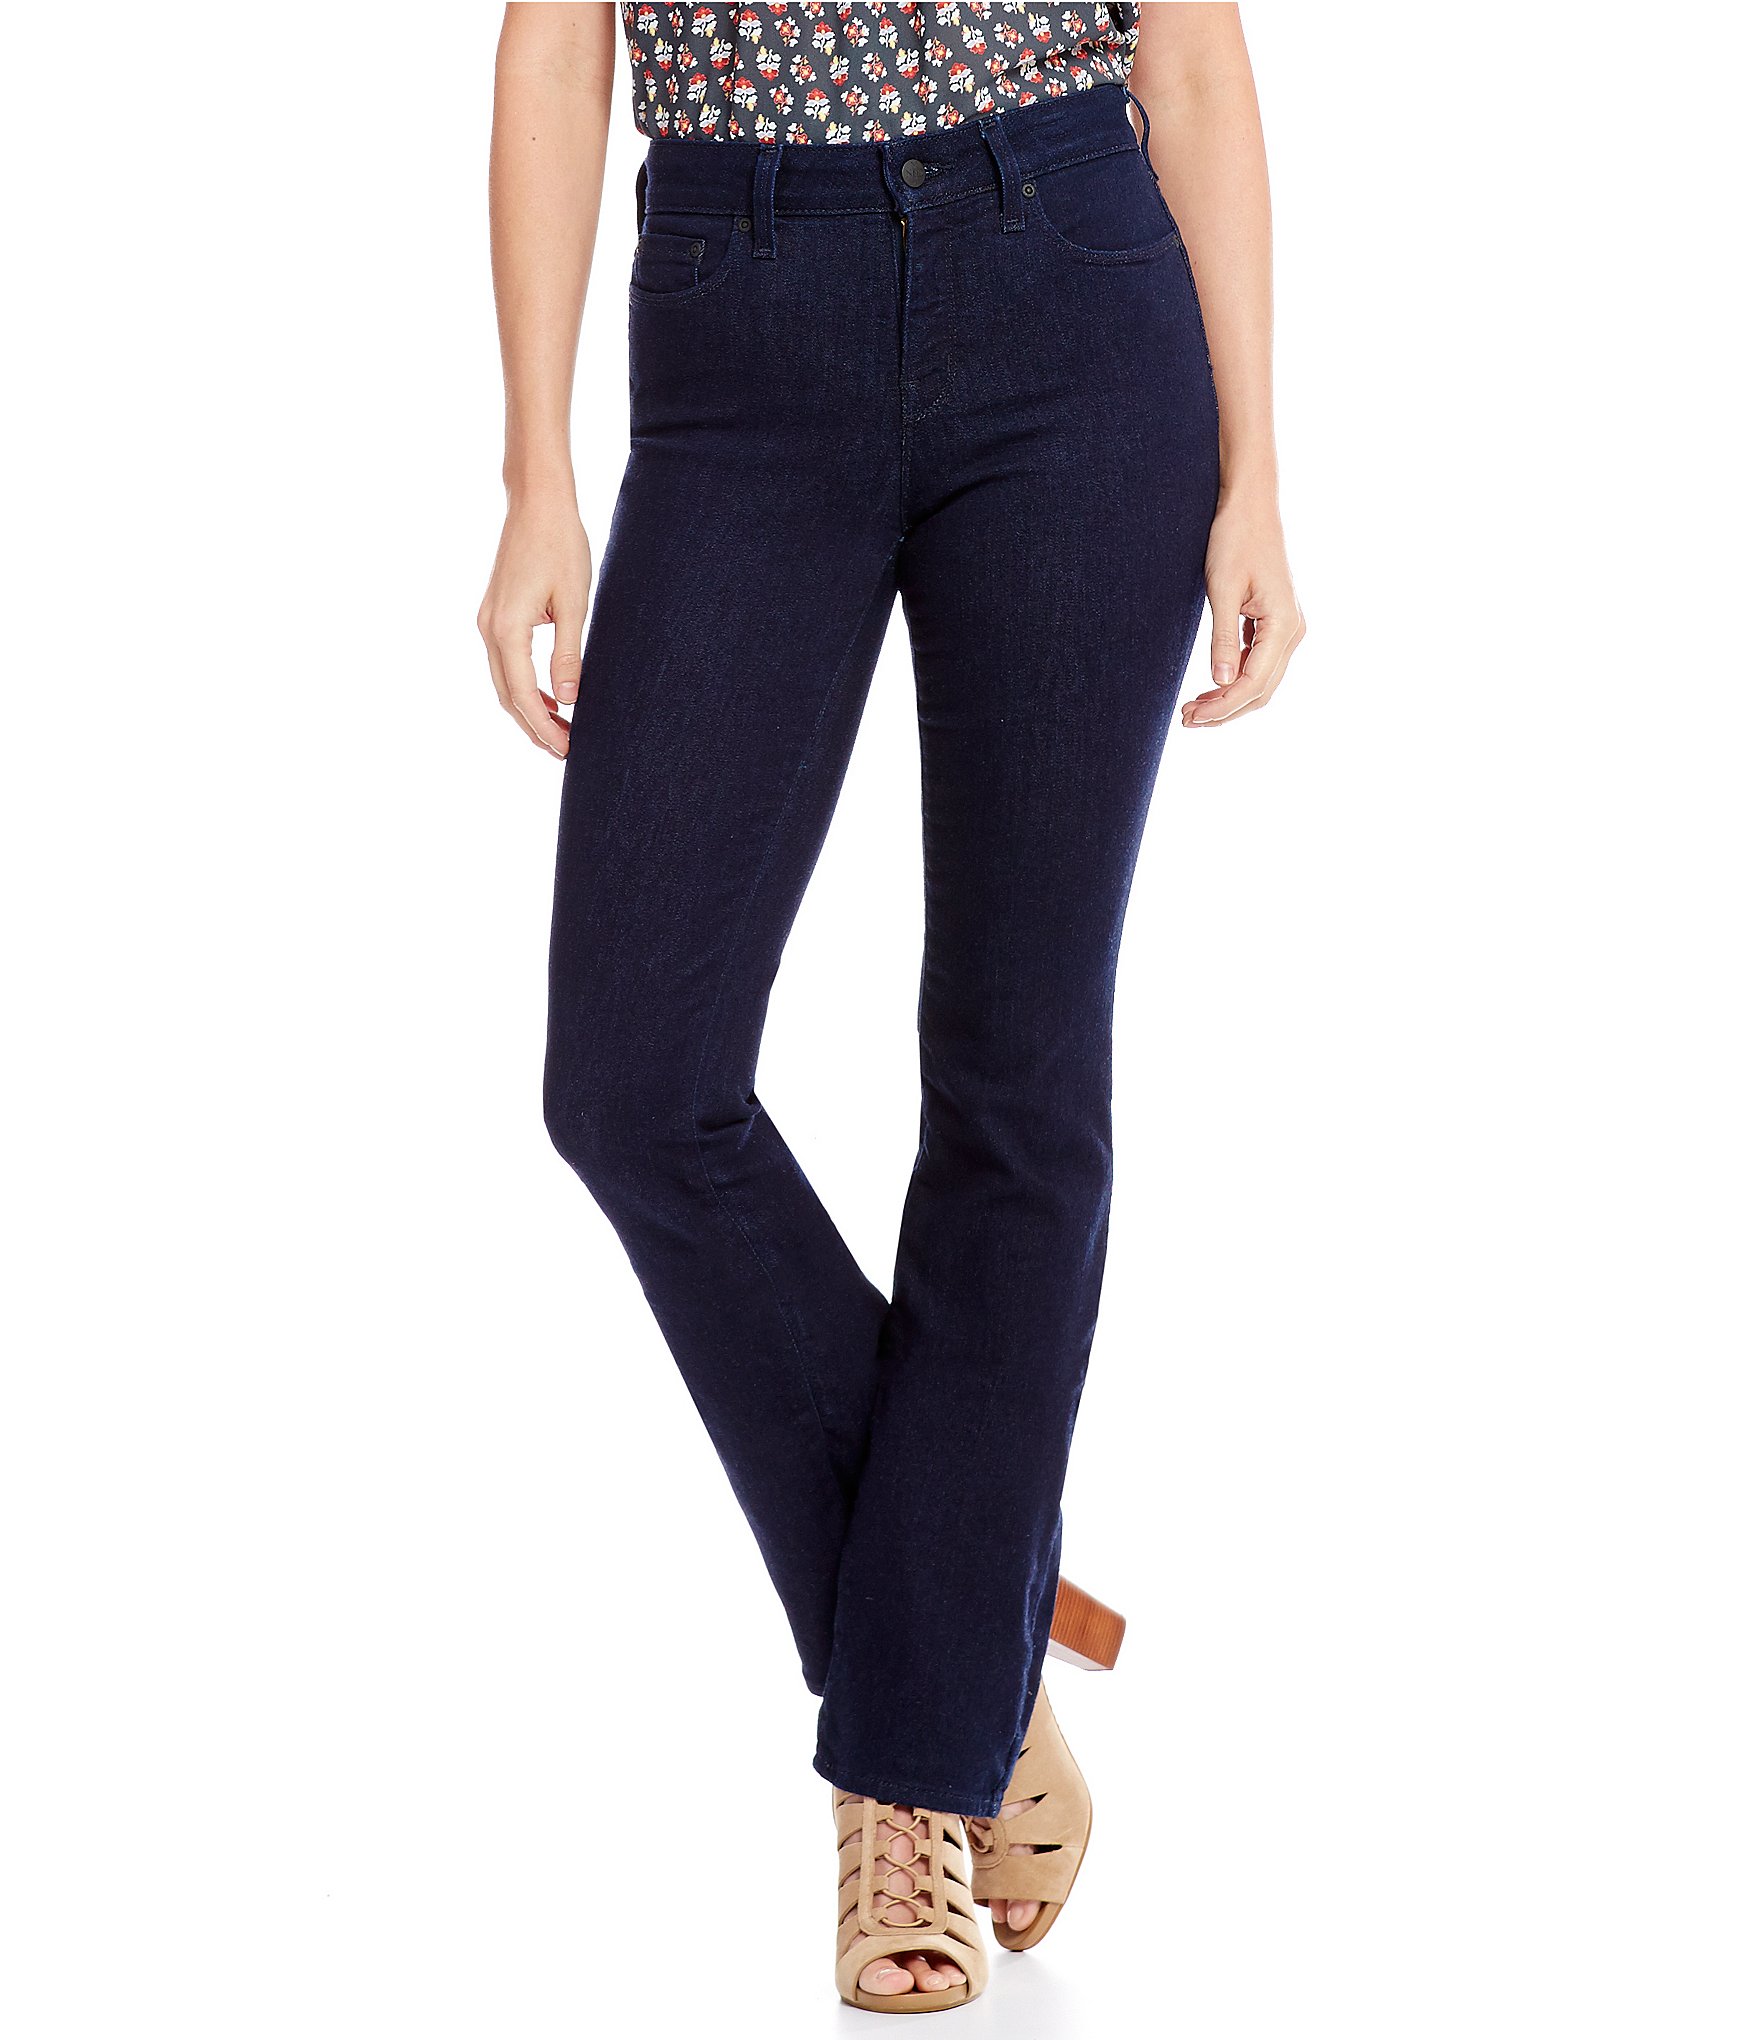 NYDJ Womens Petite Size Marilyn Straight Leg Jeans with Roll Cuff in Sure Stretch Denim